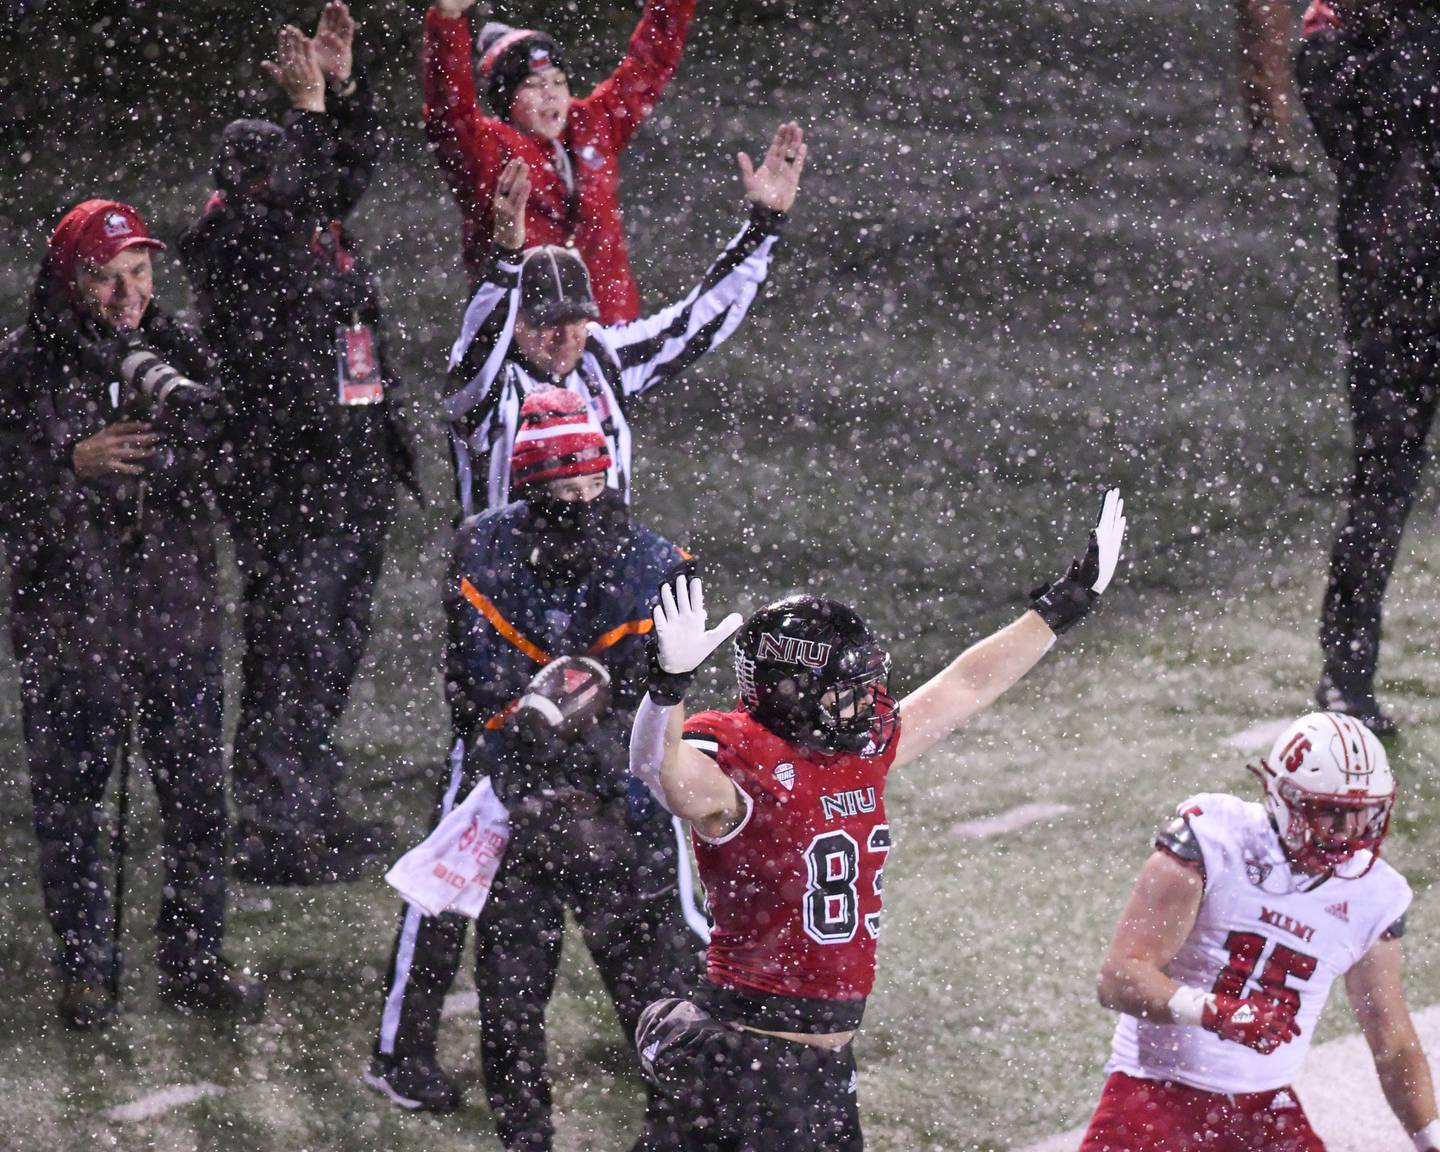 NIU Liam Soraghan, 83, celebrates after catching a pass from teammate QB Nevan Cremascoli in the first quarter Wednesday Nov. 16th at Huskies Stadium in DeKalb while taking on Miami of Ohio.